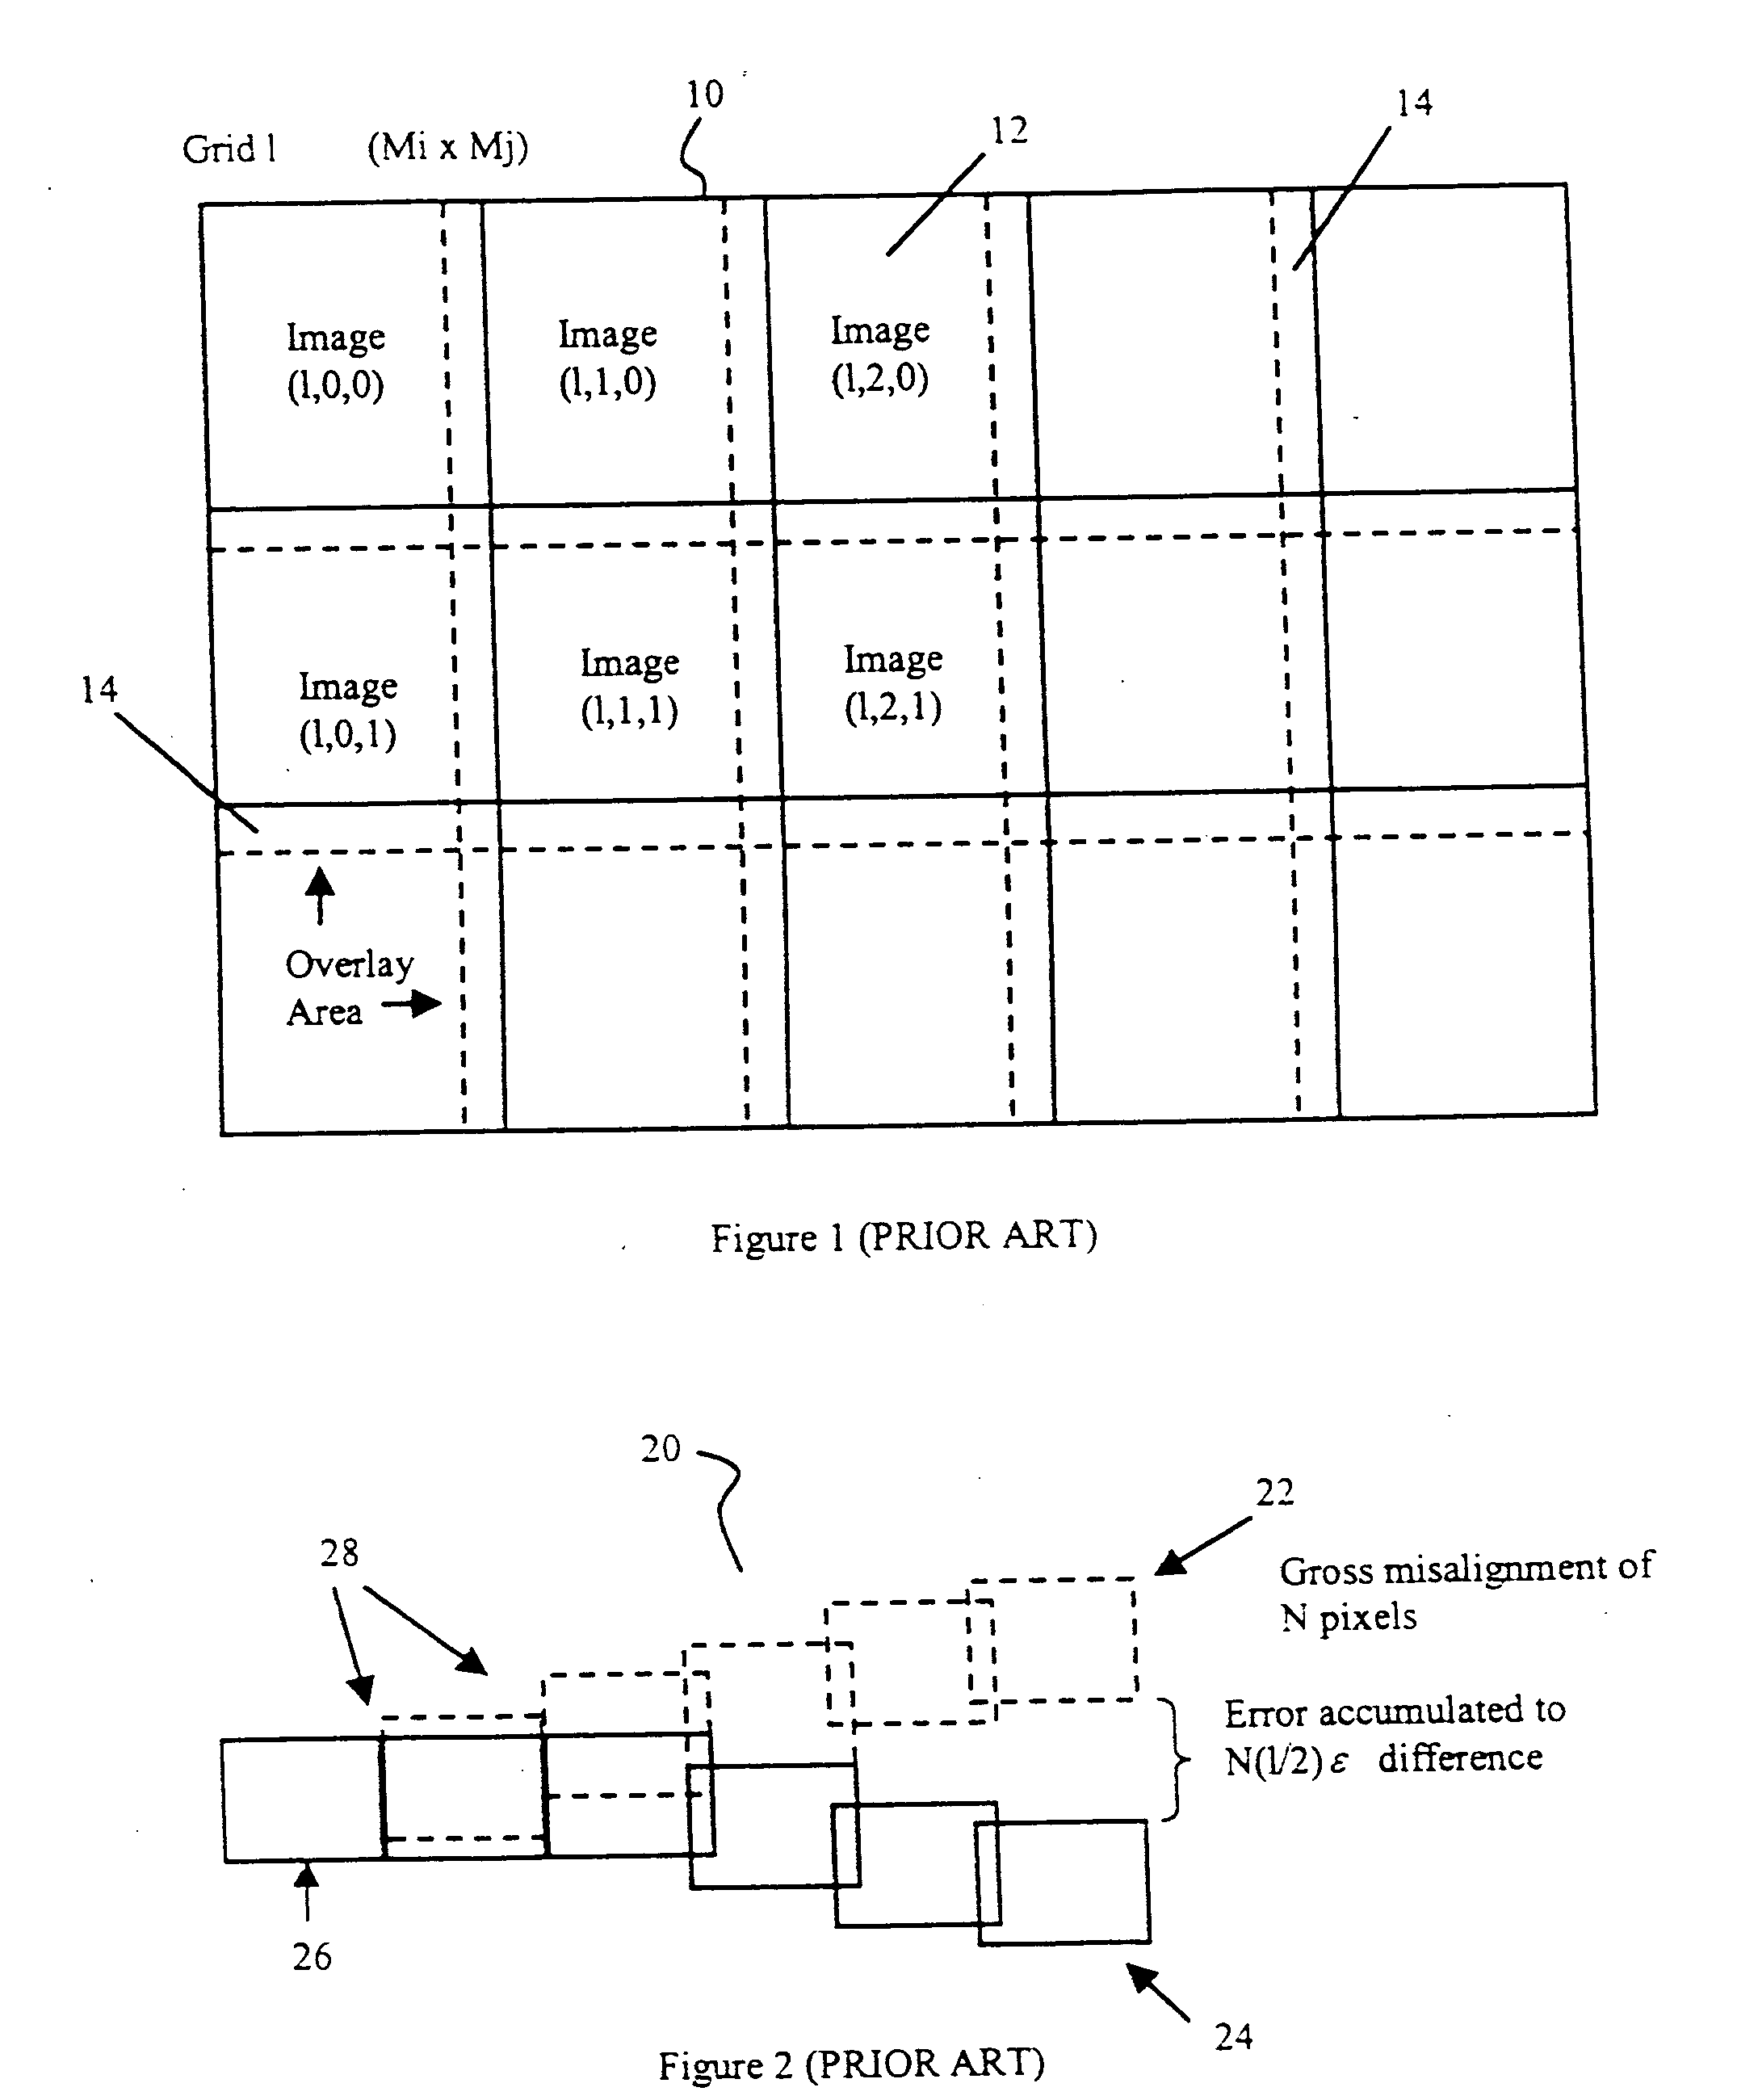 Method of registering and aligning multiple images